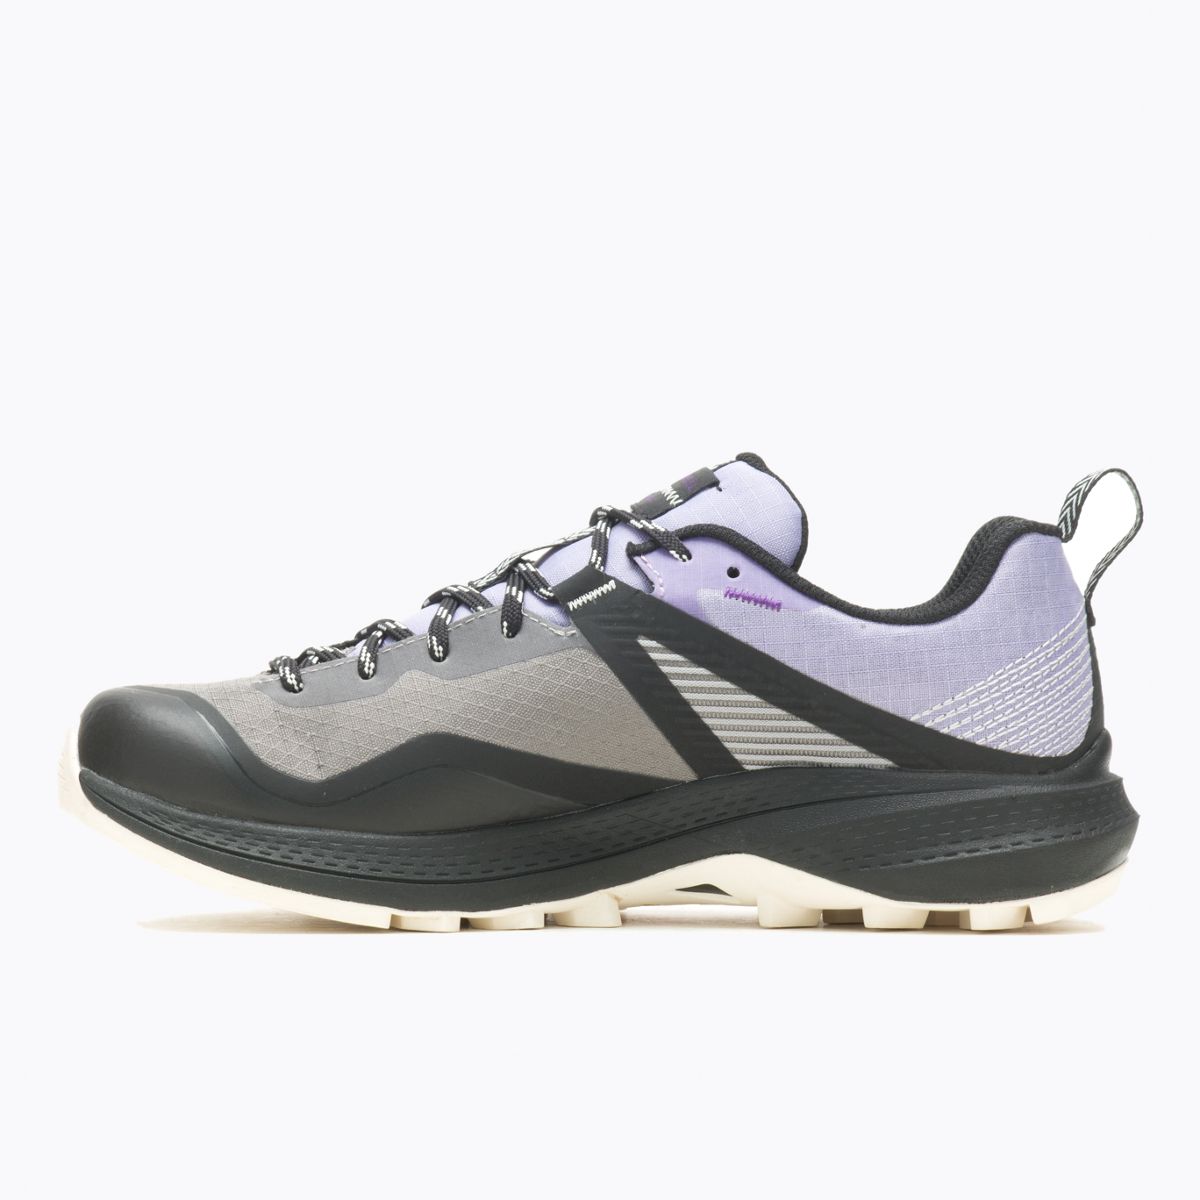 MQM 3 GORE-TEX®, Charcoal/Orchid, dynamic 3